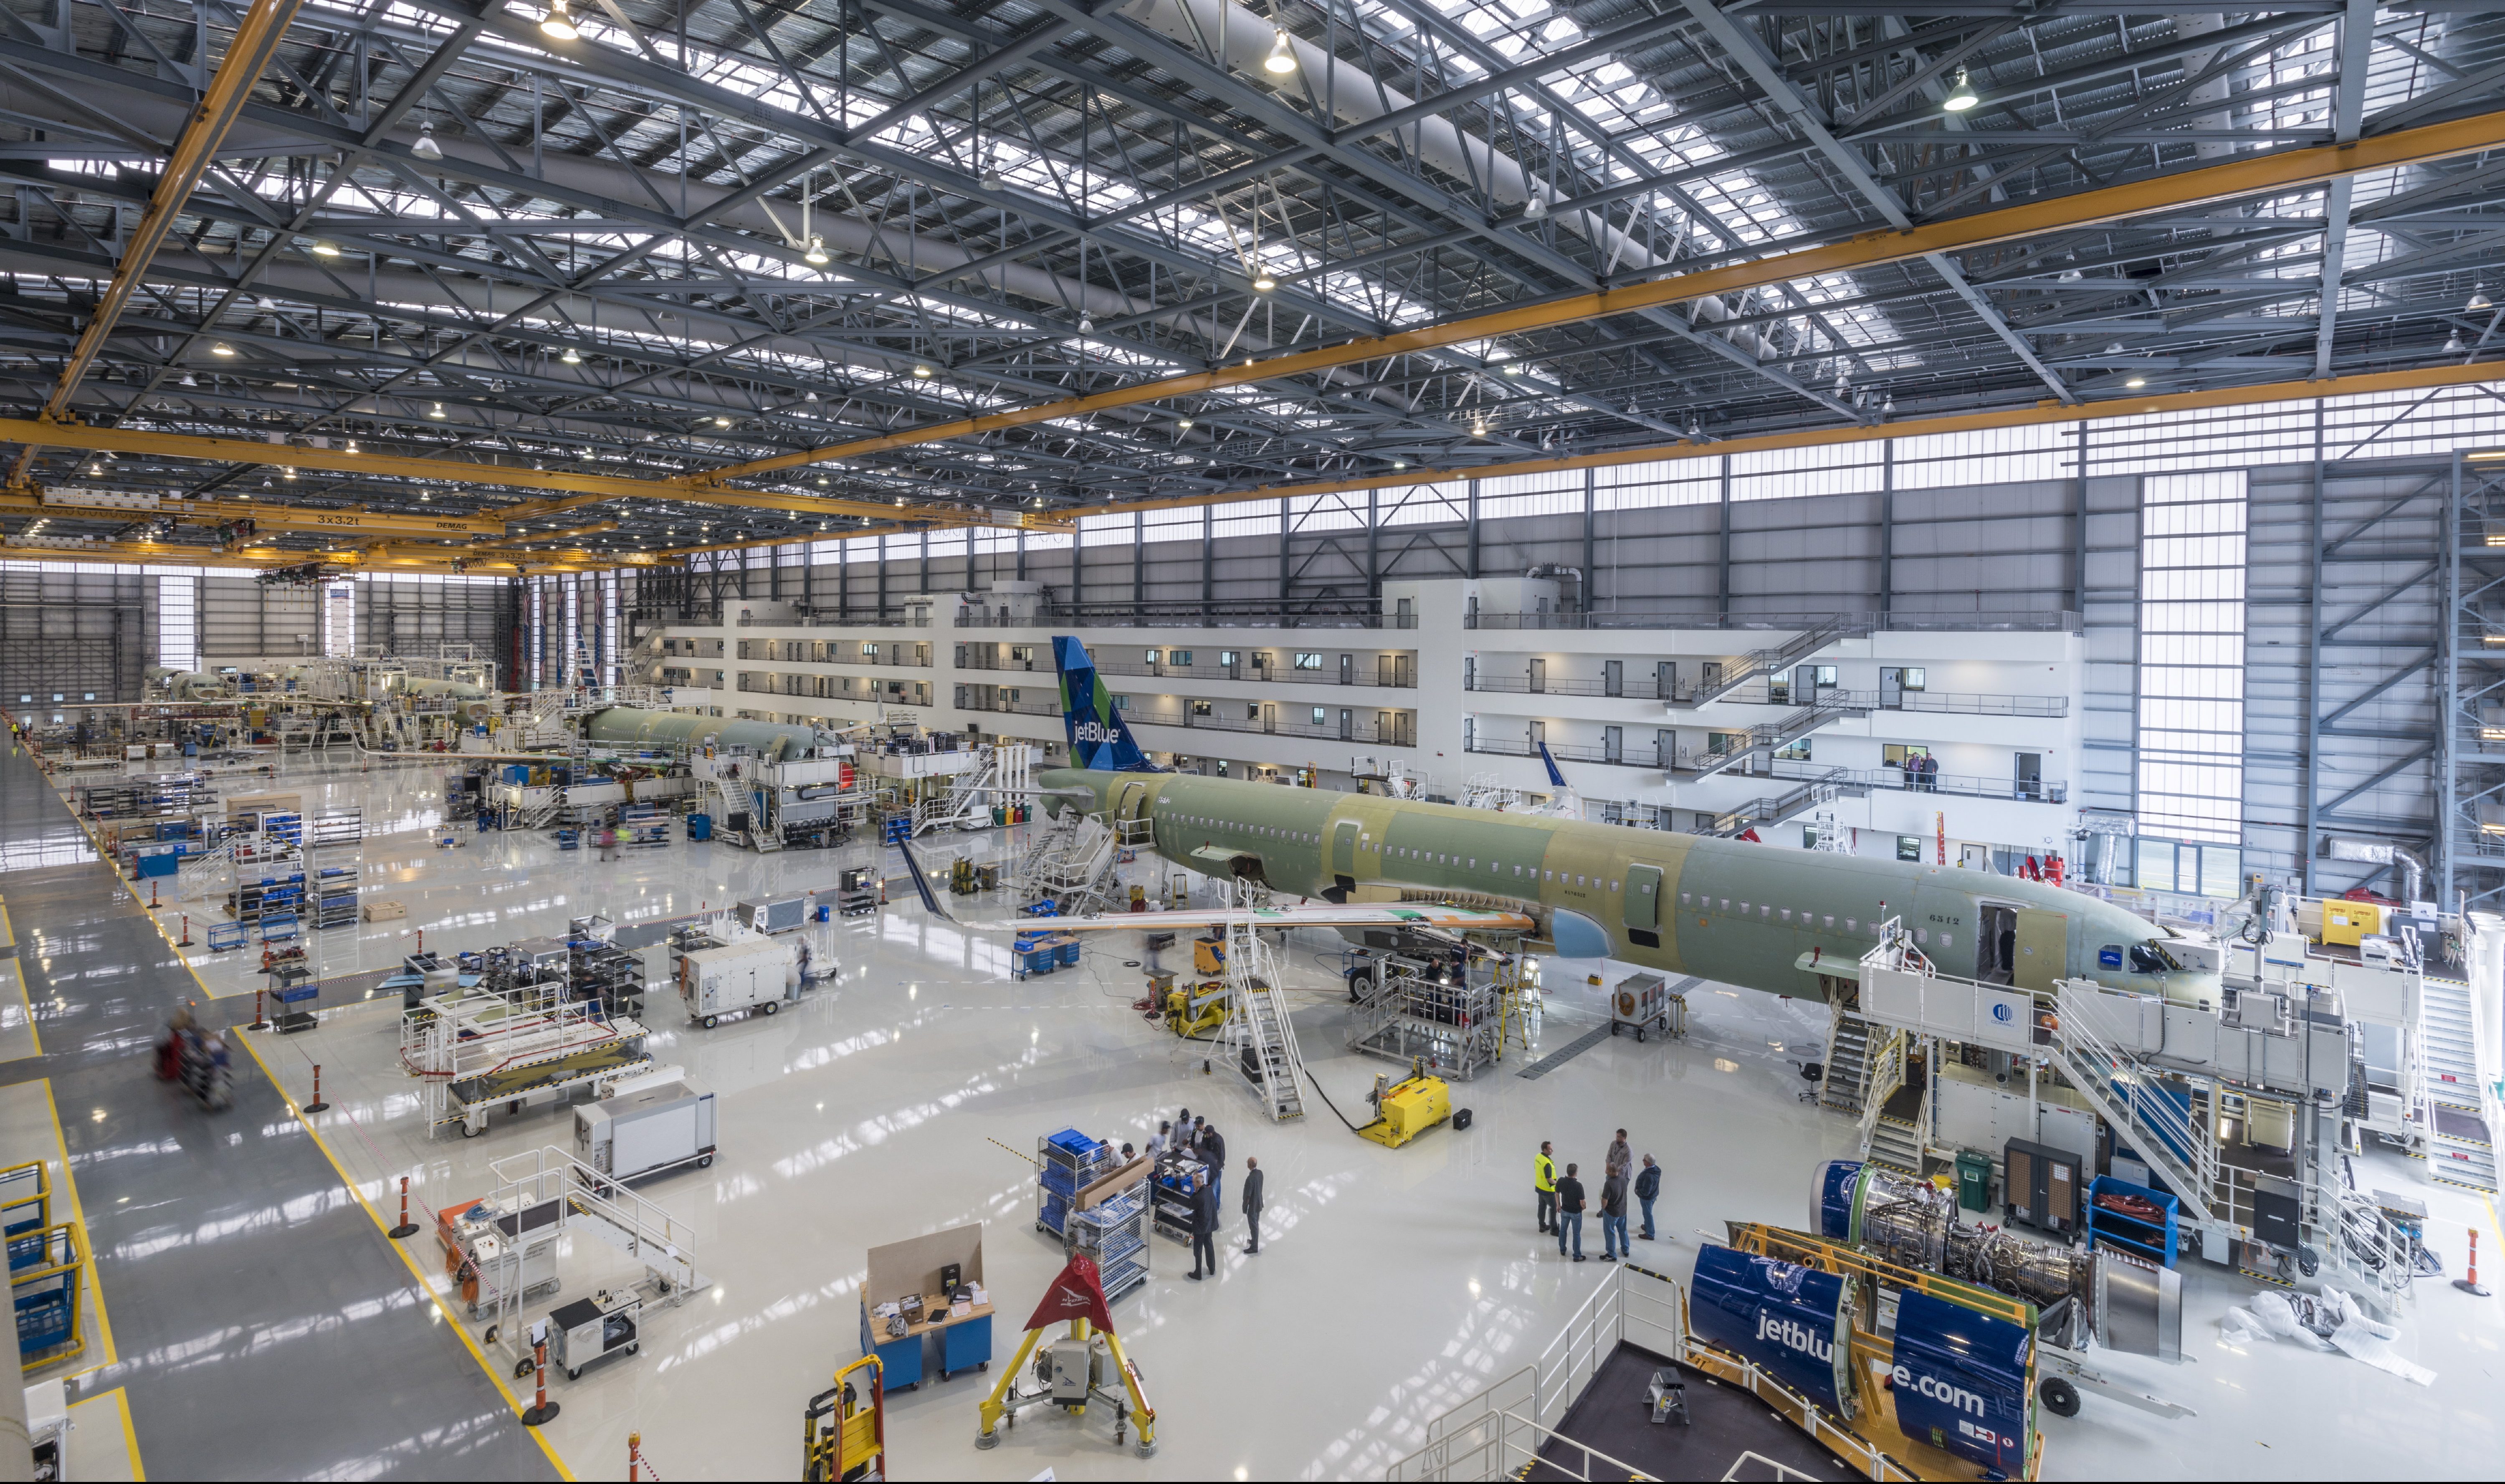 Interior view of Airbus' new A220 aircraft production facility in Alabama